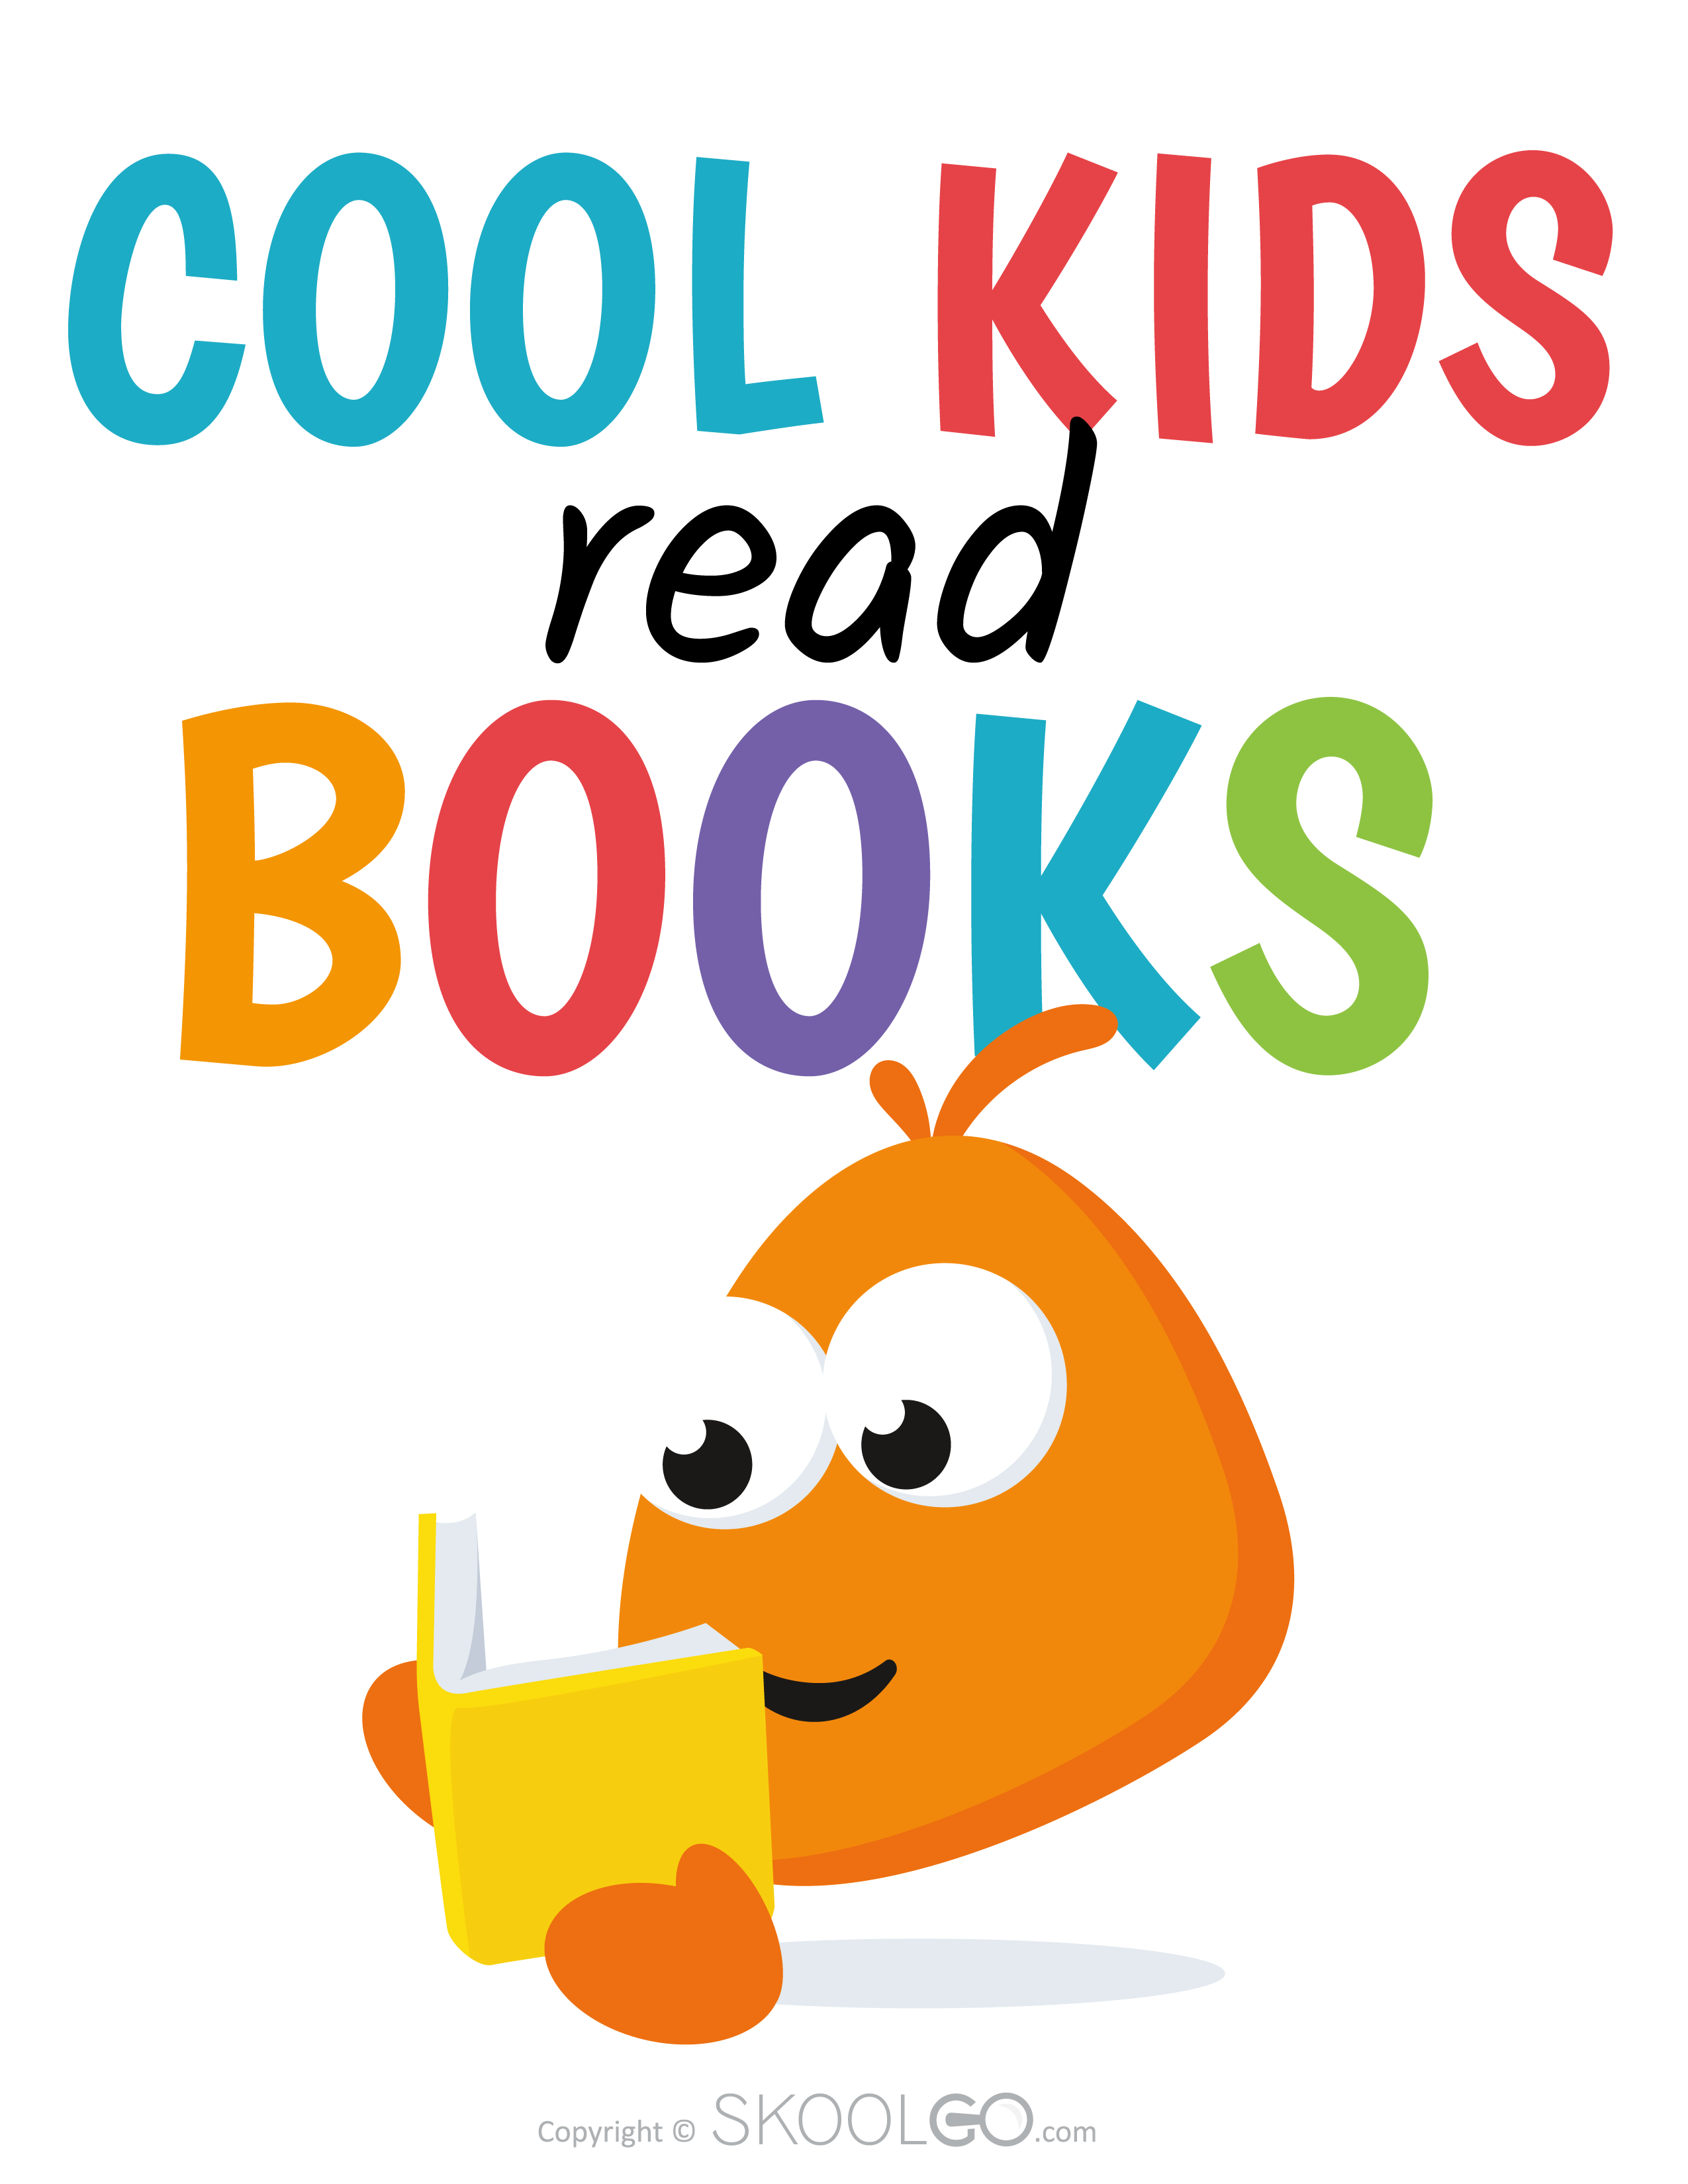 Cool Kids Read Books - Free Classroom Poster